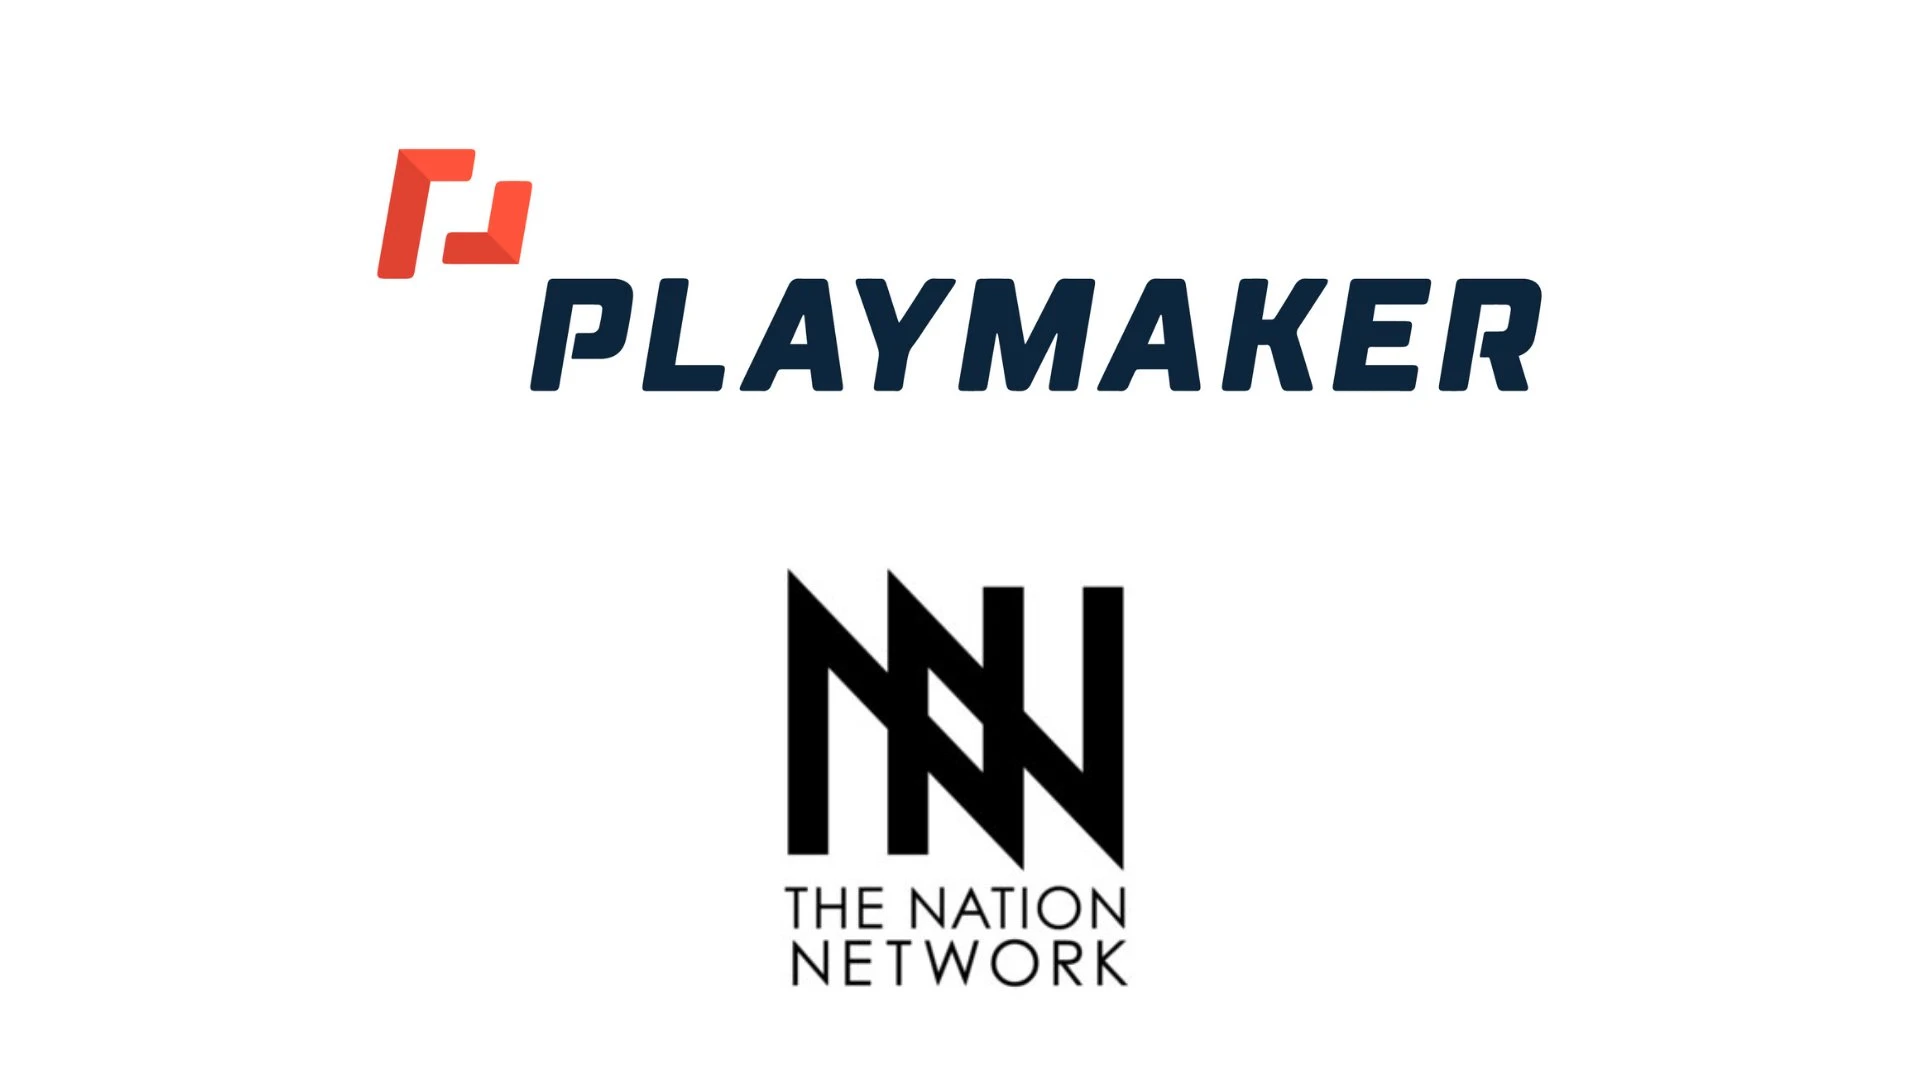 The Nation Network